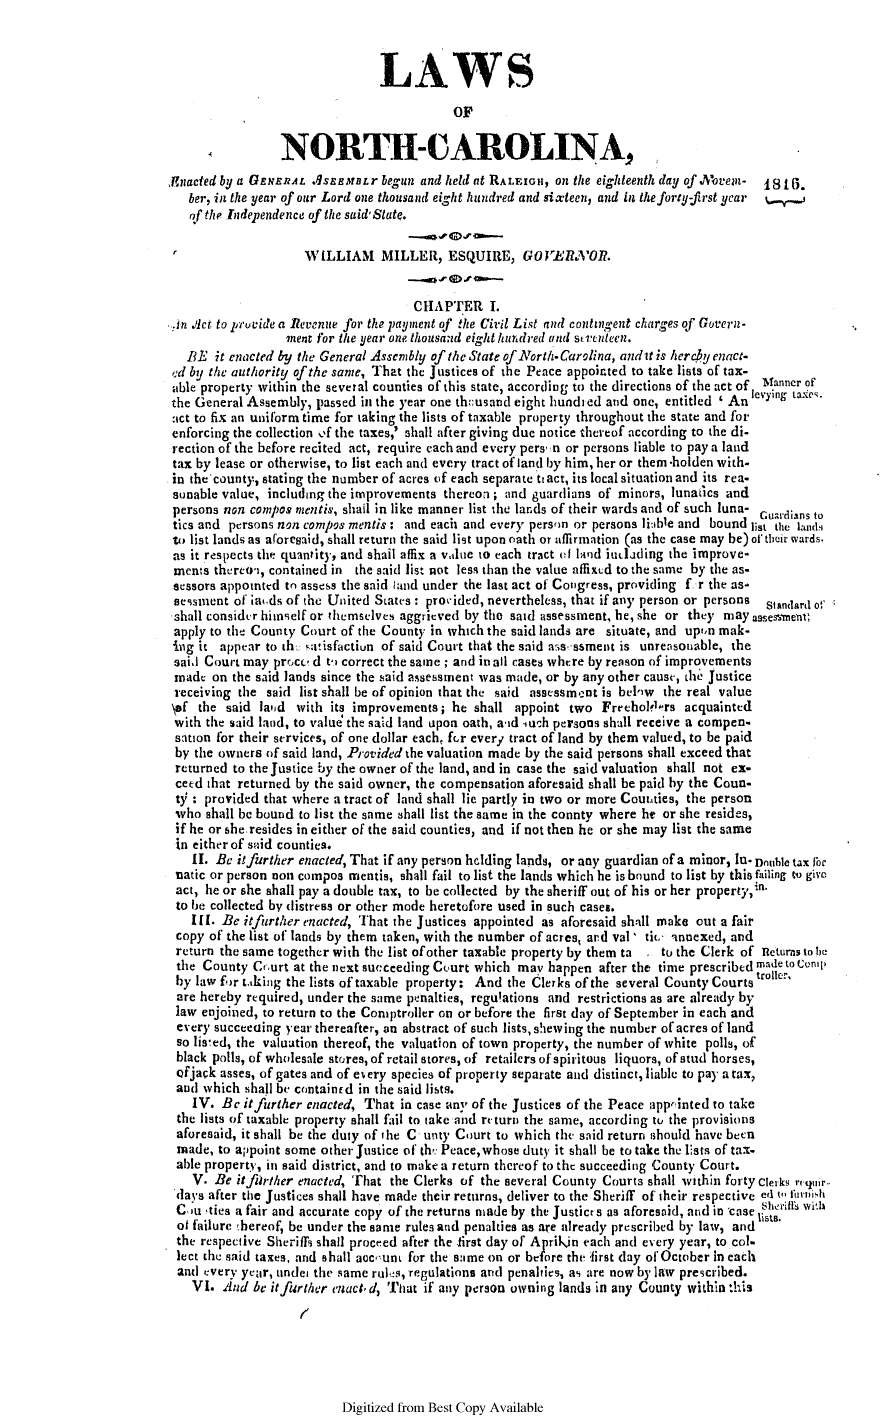 handle is hein.slavery/ssactsnc0032 and id is 1 raw text is: LAWS
OF
NORTH-CAROLINA,
Anacted by a GENERAL qSErBfBLr begun and held at RALEIGH, on the eighteenth day of  ovent-  181C.
ber, in the year of our Lord one thousand eight hundred and sixteen, and in the forty-first year  % s
of the Independence of the said'State.
WILLIAM MILLER, ESQUIRE, GO2'ElOR.
CHAPTER I.
,In iAct to pruvide a Revenue for the payment of the Civil List and contingent charges of Govern-
ment for the year one thousand eight hundred and stienteen.
BE it enacted by the General Assembly of the State of North-Carolina, andit is herchy enact-
ed by the authority of the same, That the Justices of the Peace appointed to take lists of tax-
able property within the several counties of this state, according to the directions of the act of Manner o
the General Assembly, passed in the year one thousand eight hundi ed and one, entitled ' An levying taxes.
:ict to fix an uniform time for taking the lists of taxable property throughout the state and for
enforcing the collection of the taxes,' shall after giving due notice thereof according to the di-
rection of the before recited act, require each and every pers, n or persons liable to pay a land
tax by lease or otherwise, to list each and every tract of land by him, her or them -holden with-
in the county, stating the number of acres of each separate tt act, its local situation and its rea-
sonable value, including the improvements thereon; and guardians of minors, lunatics and
persons non compos mentis, shail in like manner list the lands of their wards and of such luna- Cuardians to
tics and persons non compos mentis: and each and every person or persons li:ible and bound list the lands4
to list lands as aforesaid, shall return the said list upon oath or allirmation (as the case may be) of their wards.
as it respects the quantity, and shail affix a vlue to each tract of land idjoding the improve-
ments thereoi, contained in the said list not less than the value affixid to the same by the as-
sessors appointed to assess the said iand under the last act of Congress, providing f. r the as-
sessient of aw.ds of the United States: provided, nevertheless, that if any person or persons Standard e'
shall consider himself or themselves aggrieved by the said assessment, he, she or they may assessment
apply to the County Court of the County in which the said lands are situate, and upton mak-
ing it appear to th. ,atisfactiun of said Court that the said ass-sament is unreasonable, the
said Court may proce' d to correct the same; and in all cases where by reason of improvements
made on the said lands since the said assessment was made, or by any other cause, the Justice
receiving the said list shall be of opinion that the said assessment is below the real value
\ef the said land with its improvements; he shall appoint two Freeholkirs acquainted
with the said land, to value& the said land upon oath, aid such persons shall receive a compen-
sation for their services, of one dollar each, for every tract of land by them valued, to be paid
by the owners of said land, Provided the valuation made by the said persons shall exceed that
returned to the Justice by the owner of the land, and in case the said valuation shall not ex-
ceed that returned by the said owner, the compensation aforesaid shall be paid by the Coun-
ty : provided that where a tract of land shall lie partly in two or more Counties, the person
who shall be bound to list the same shall list the same in the connty where he or she resides,
if he or she resides in either of the said counties, and if not then he or she may list the same
in either of said counties.
II. Be it further enacted, That if any person helding lands, or any guardian of a minor, Iu Double tax for
natic or person non compos mentis, shall fail to list the lands which he is bound to list by this failing to give
act, lie or she shall pay a double tax, to be collected by the sheriff out of his or her property,in.
to be collected by distress or other mode heretofore used in such cases.
I I. Be itfirther enacted, That the Justices appointed as aforesaid shall make out a fair
copy of the list of lands by them taken, with the number of acres, ard val' tit- annexed, and
return the same together with the list of other taxable property by them ta  . to the Clerk of neturns to be
the County Crurt at the next succeeding Court which may happen after the time prescribed madetoconip
by law f>r t.Aking the lists of taxable property: And the Clerks of the several County Courts trolle.
are hereby required, under the same penalties, regulations and restrictions as are already by
law enjoined, to return to the Comptroller on or before the first day of September in each and
every succecing year thereafter, an abstract of such lists, sheiwing the number of acres of land
so listed, the valuation thereof, the valuation of town property, the number of white polls, of
black polls, of wholesale stores, of retail stores, of retailers of spiritous liquors, of stud horses,
ofjack asses, of gates and of every species of property separate and distinct, liable to pay a tax,
and which shall be containrd in the said lists.
IV. Be it further enacted, That in case any of the Justices of the Peace apprinted to take
the lists of taxable property shall fail to take and return the same, according to the provisions
aforesaid, it shall be the duty of the C unty Court to which the said return should have been
made, to appoint some other Justice of th': Peace,whose duty it shall be to take the lists of tax.
able property, in said district, and to make a return thereof to the succeeding County Court.
V. Be it fjrther enacted, That the Clerks of the several County Courts shall within forty Clerks ruquir..
days after the Justices shall have made their returns, deliver to the Sheriff of their respective ed to fulrniish
C'u -ties a fair and accurate copy of the returns made by the Justicrs as aforesaid, and in 'case r with
of failure hereof, be under the same rules and penalties as are already prescribed by law, and
the respective Sheriffs shall proceed after the first day of Aprilin each and every year, to col-
lect the said taxes, and shall aocount for the same on or before the lirst (lay of October in each
and every year, undet the same rules, regulations and penalties, as are now by law prescribed.
VI. And be it further enact. d, That if any person owning lands in any County within this
t,

Digitized from Best Copy Available


